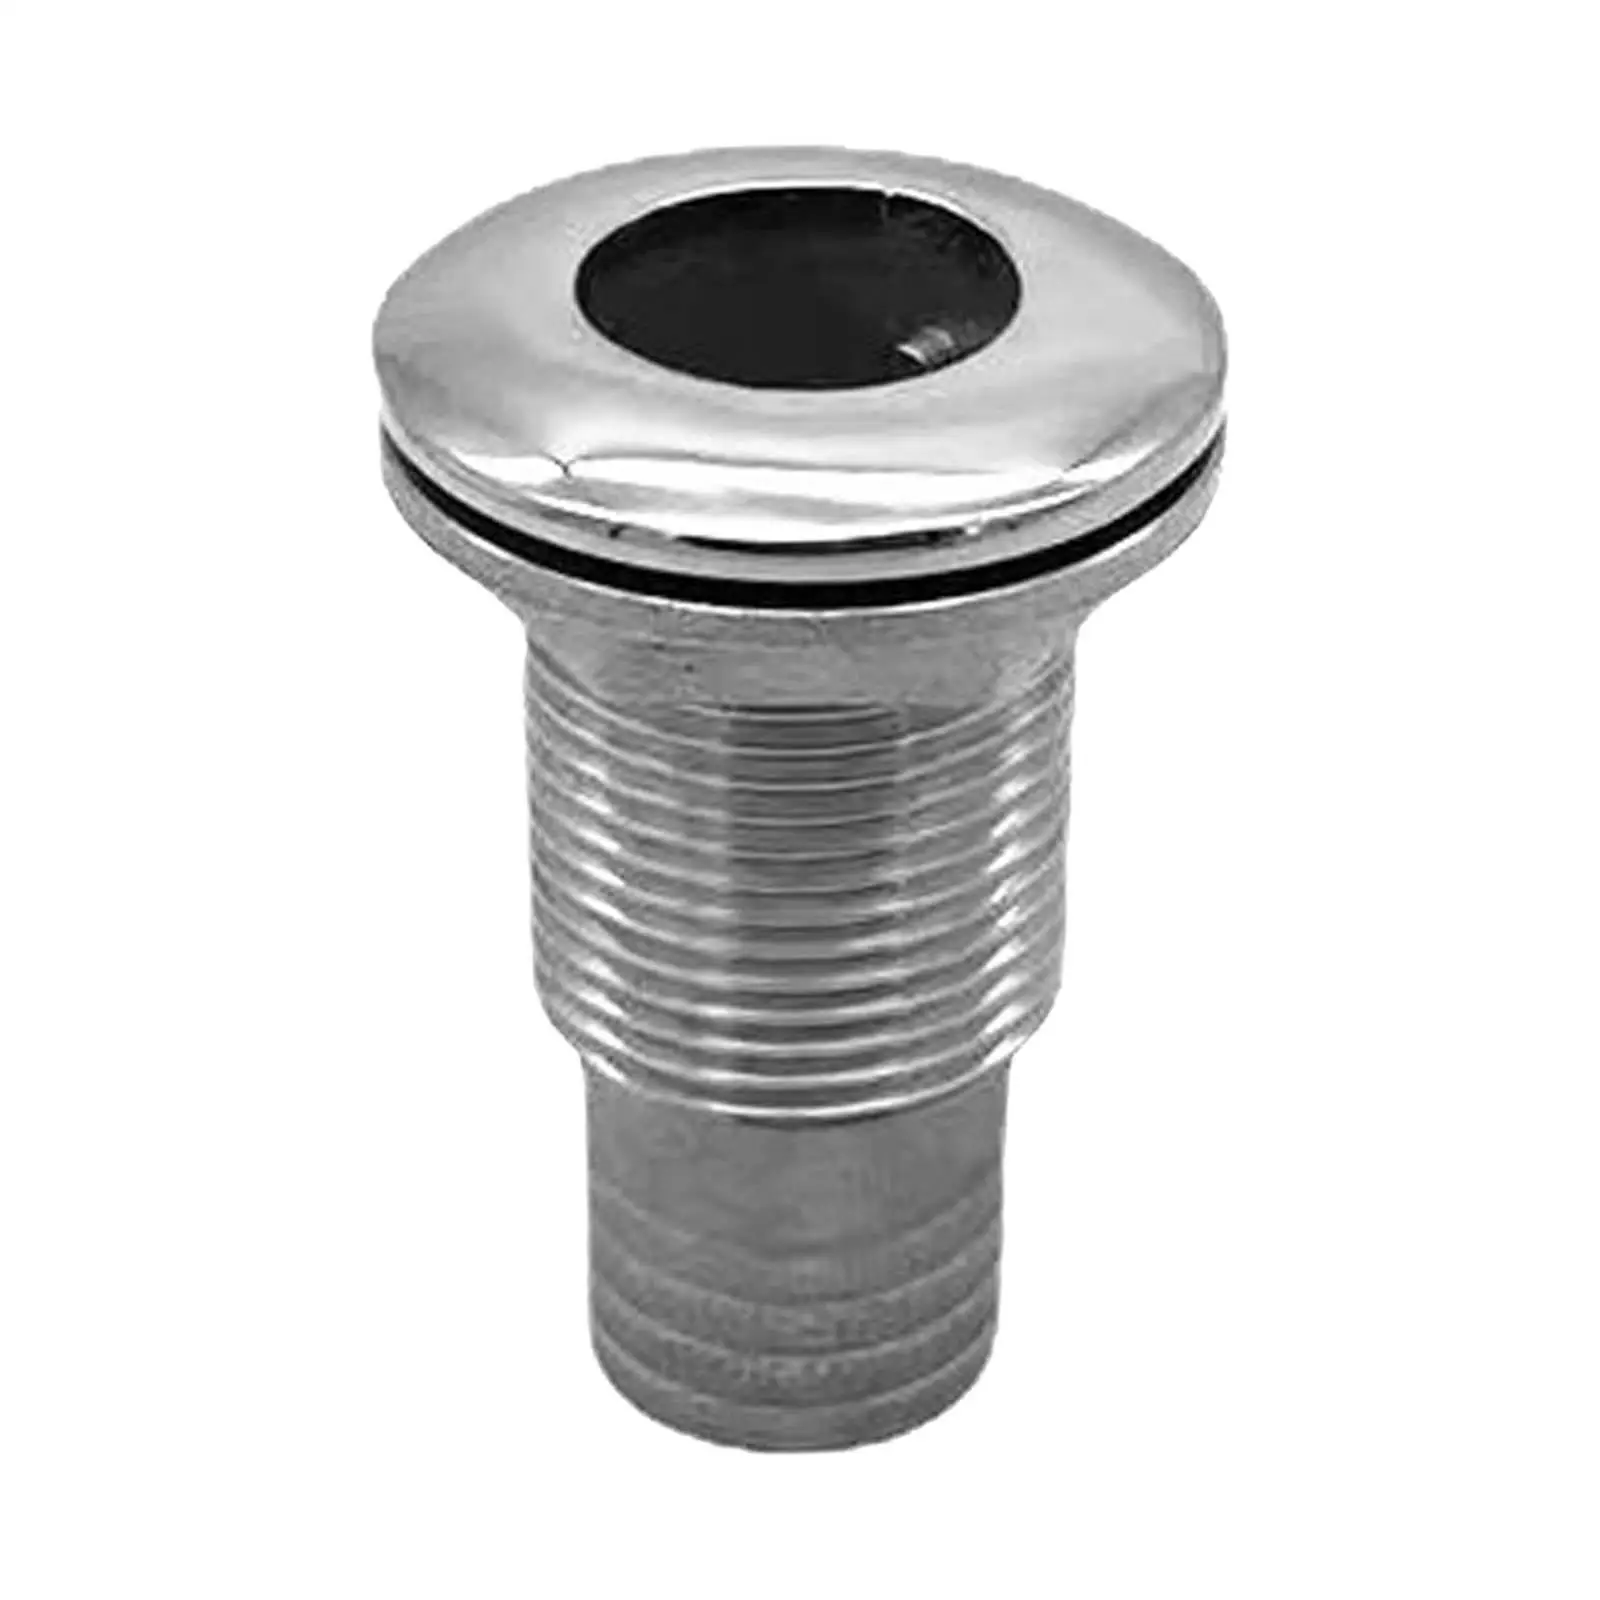 Yacht Thru Hull Fitting Drain Vent Solid Straight Rust Water Outlet for Boats Automotive Marine Yachts Thru Hull